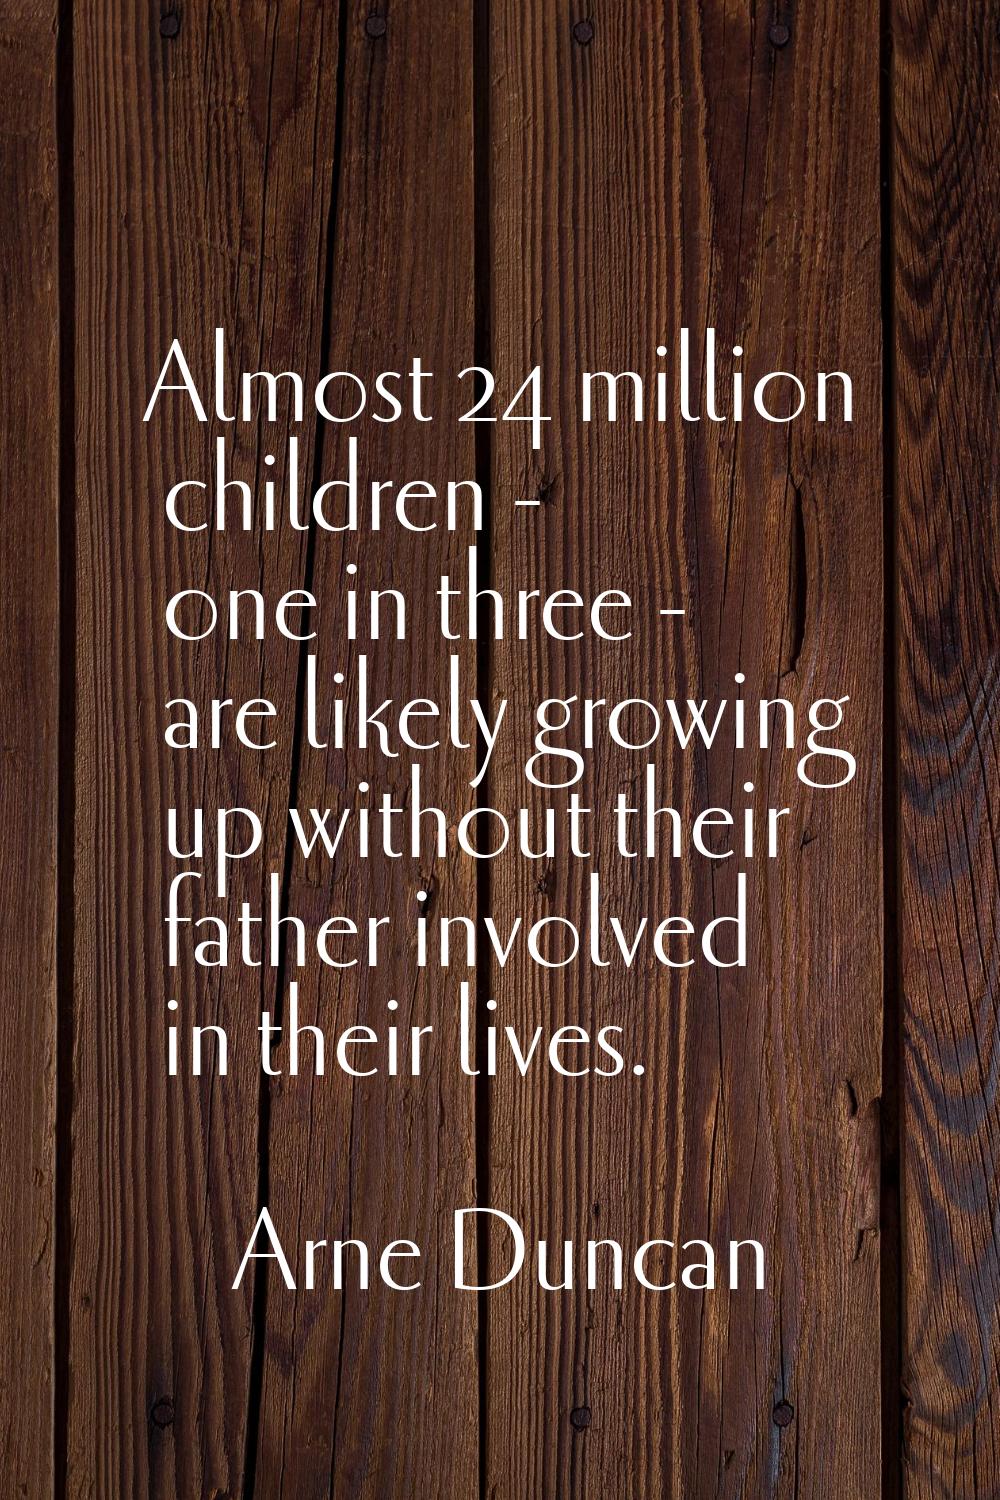 Almost 24 million children - one in three - are likely growing up without their father involved in 